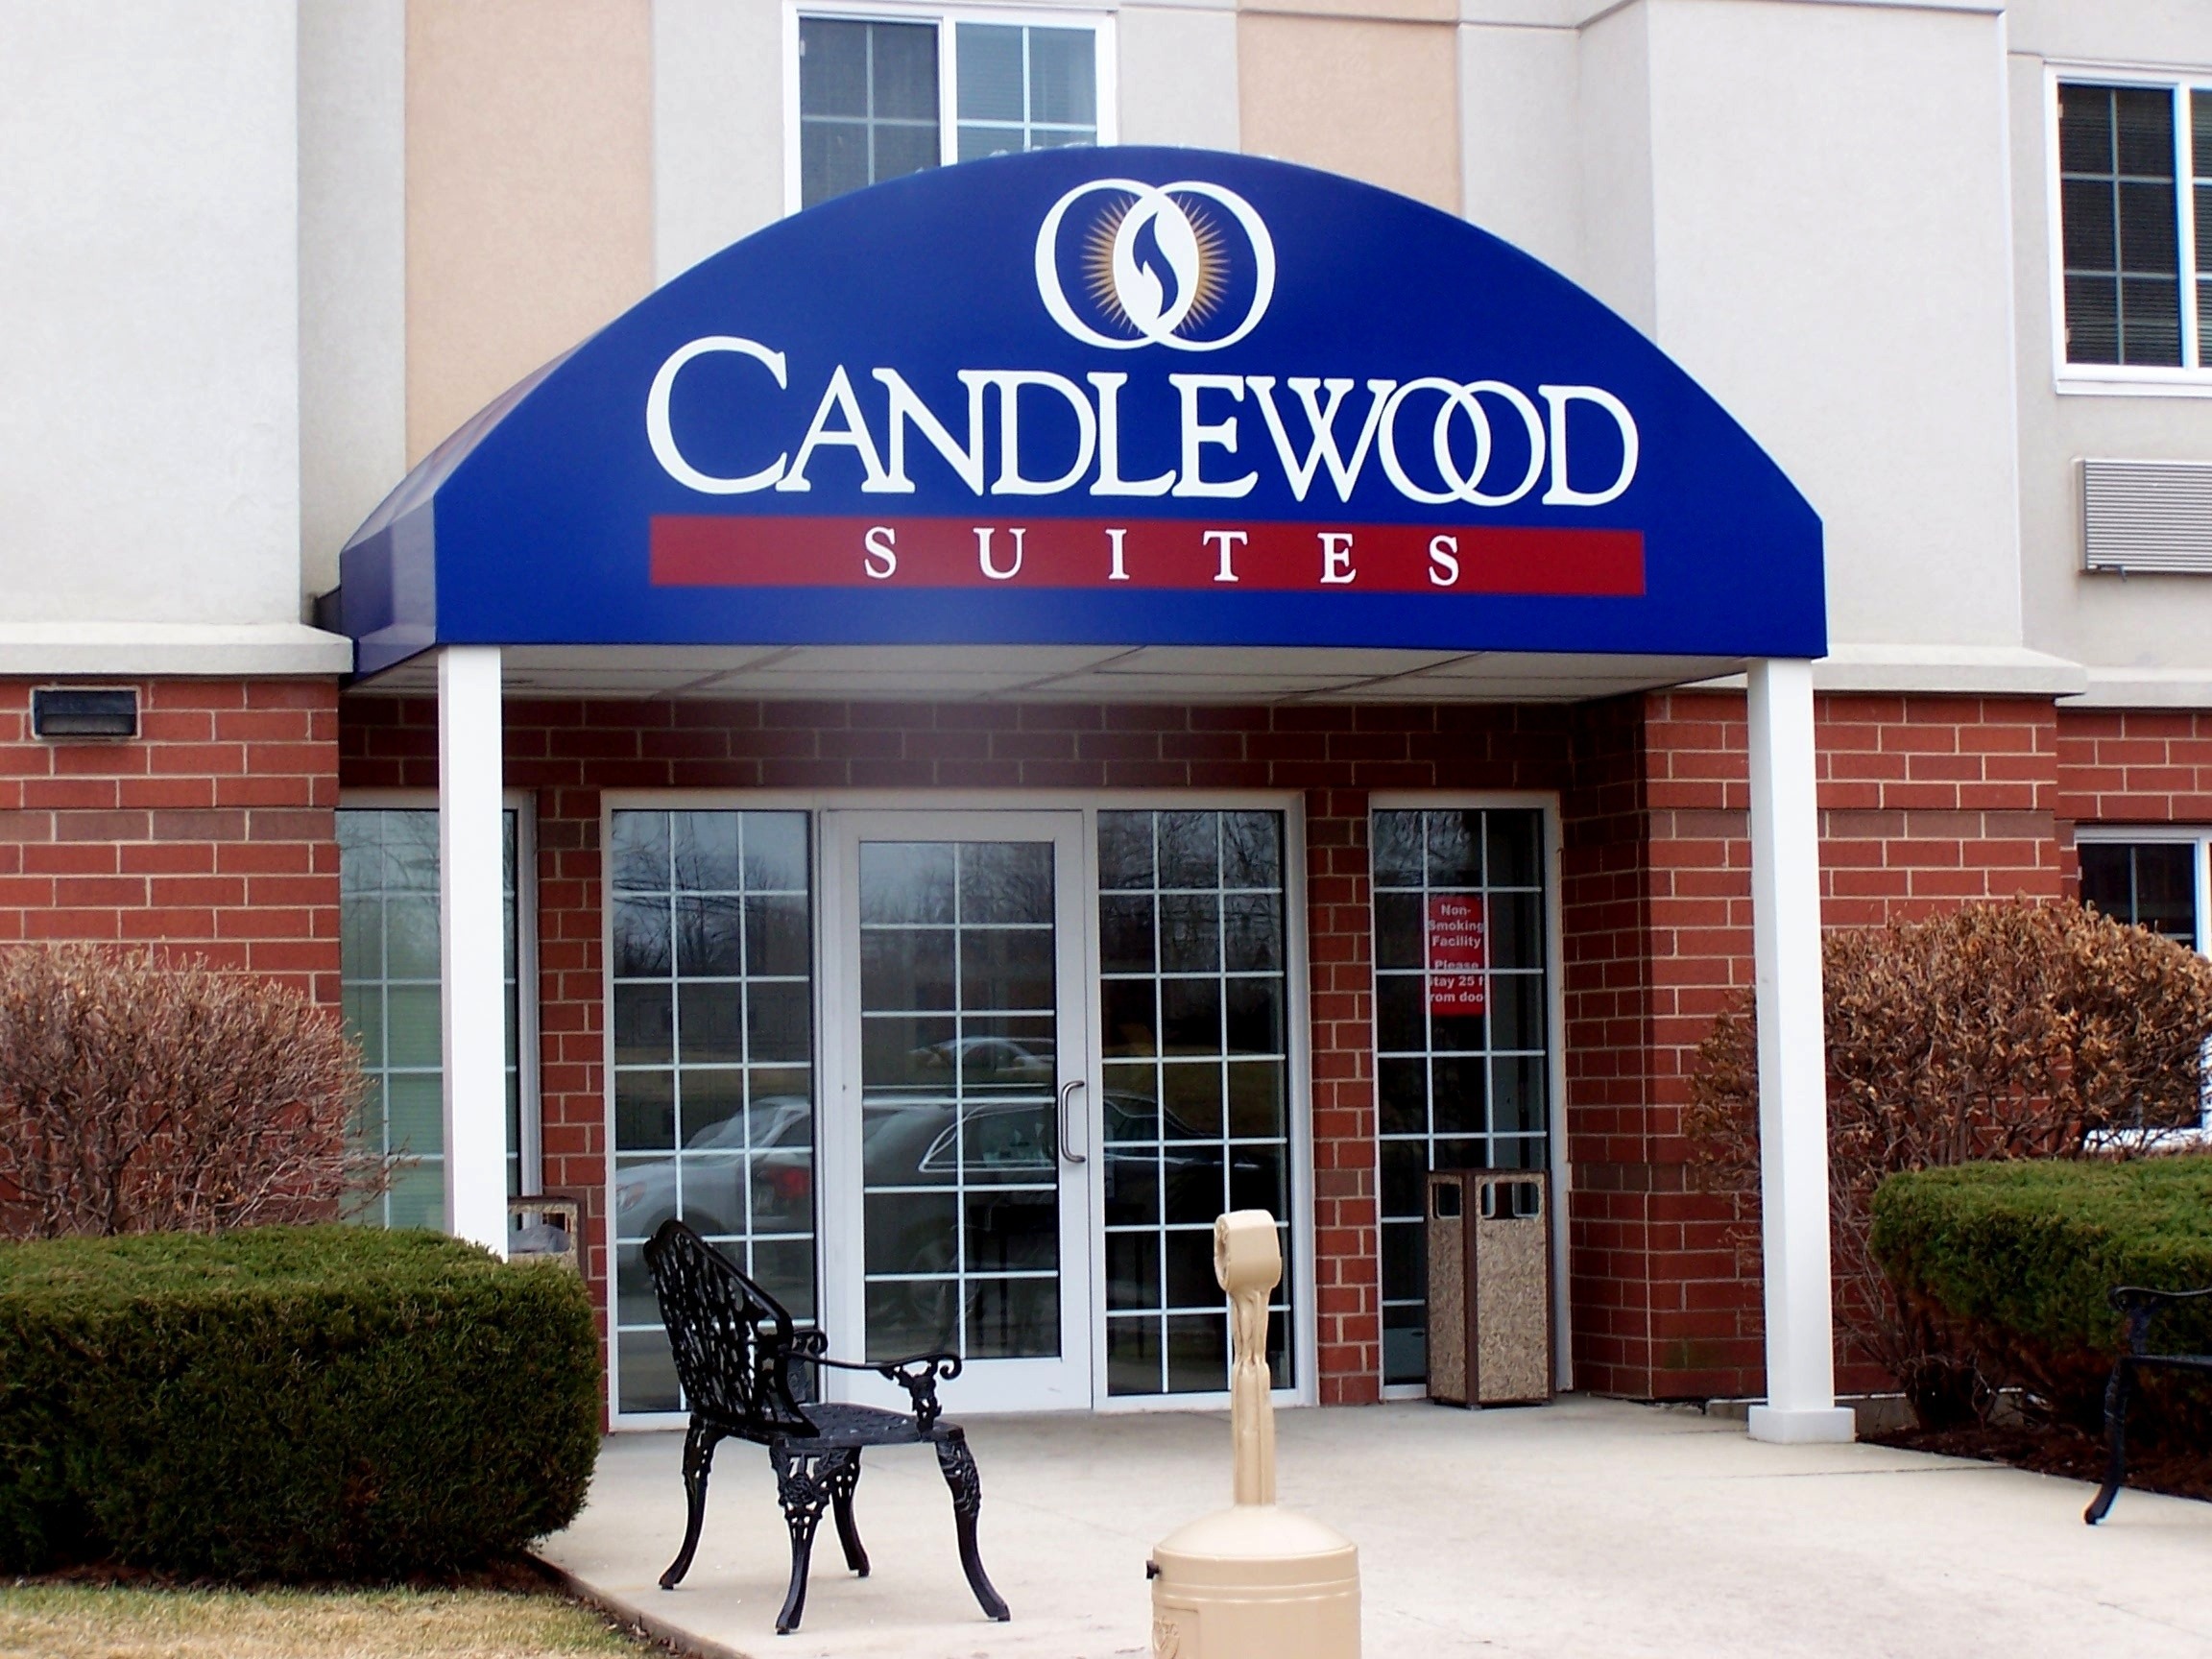 Photo of Candlewood Suites Chicago - Libertyville, Libertyville, IL